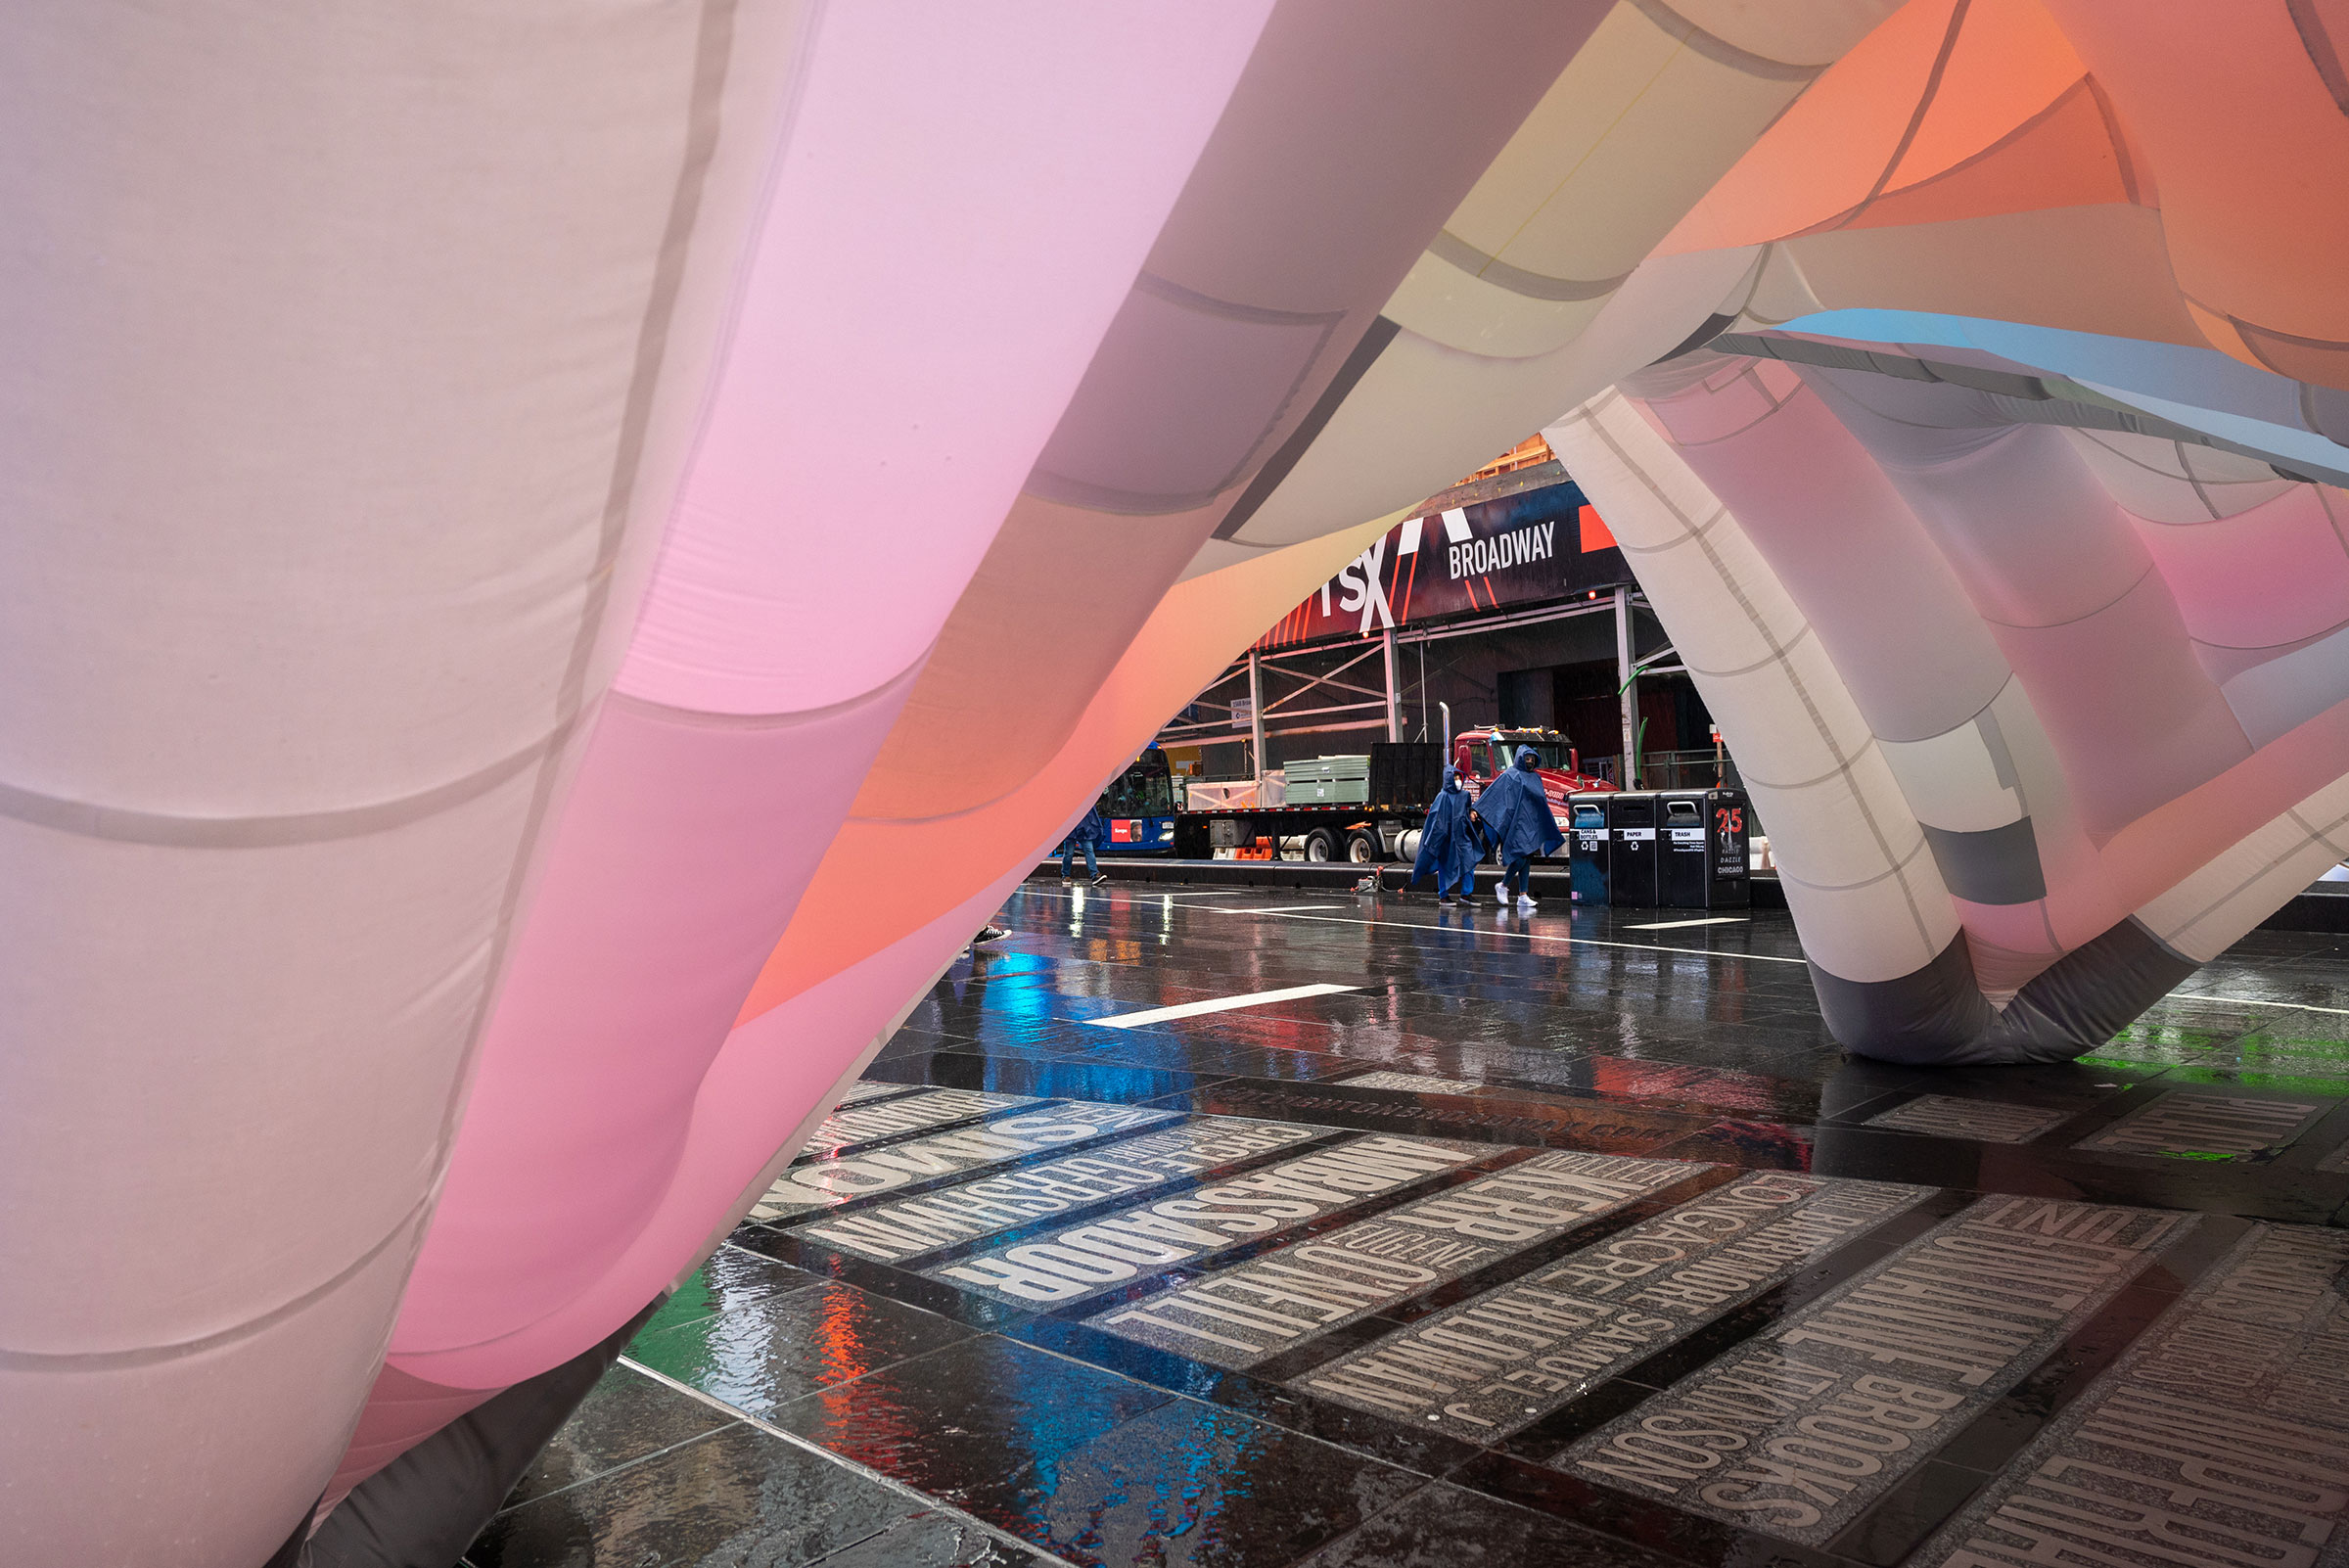 Inside the “Pop Up/Drop Off” Design Pavilion installation in Times Square for NYCxDESIGN